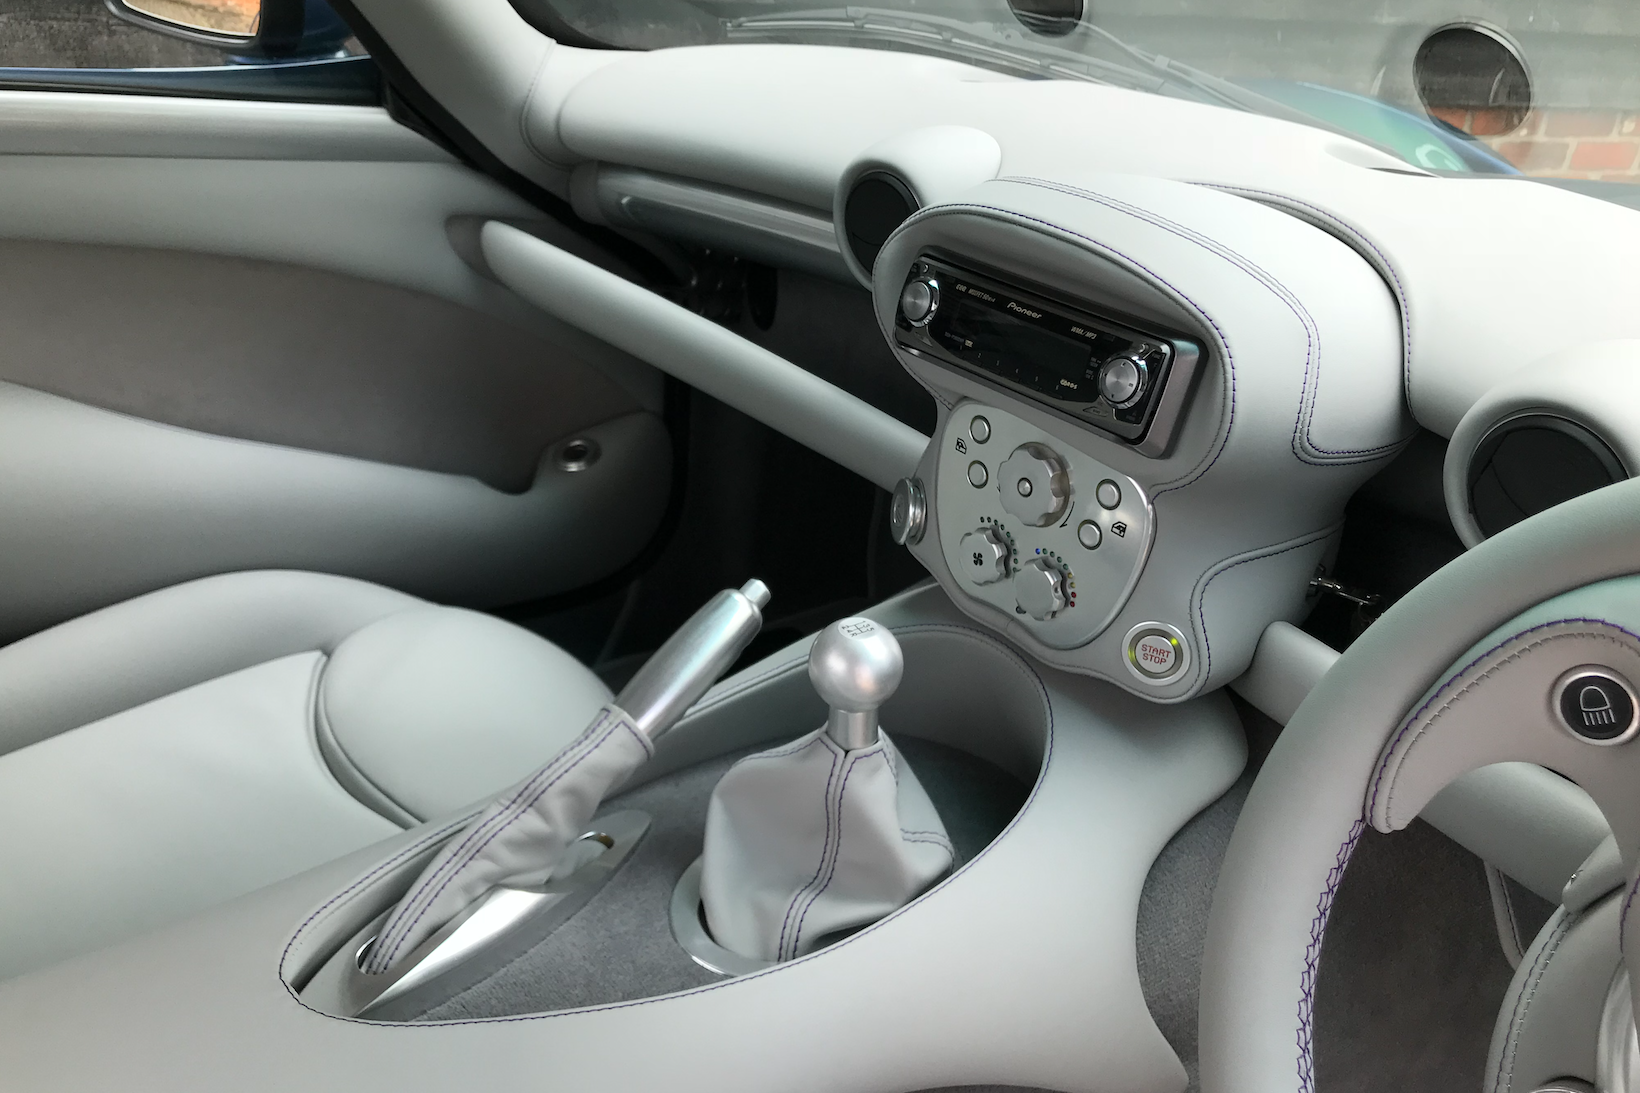 TVR Tuscan interior by SF Cartrim